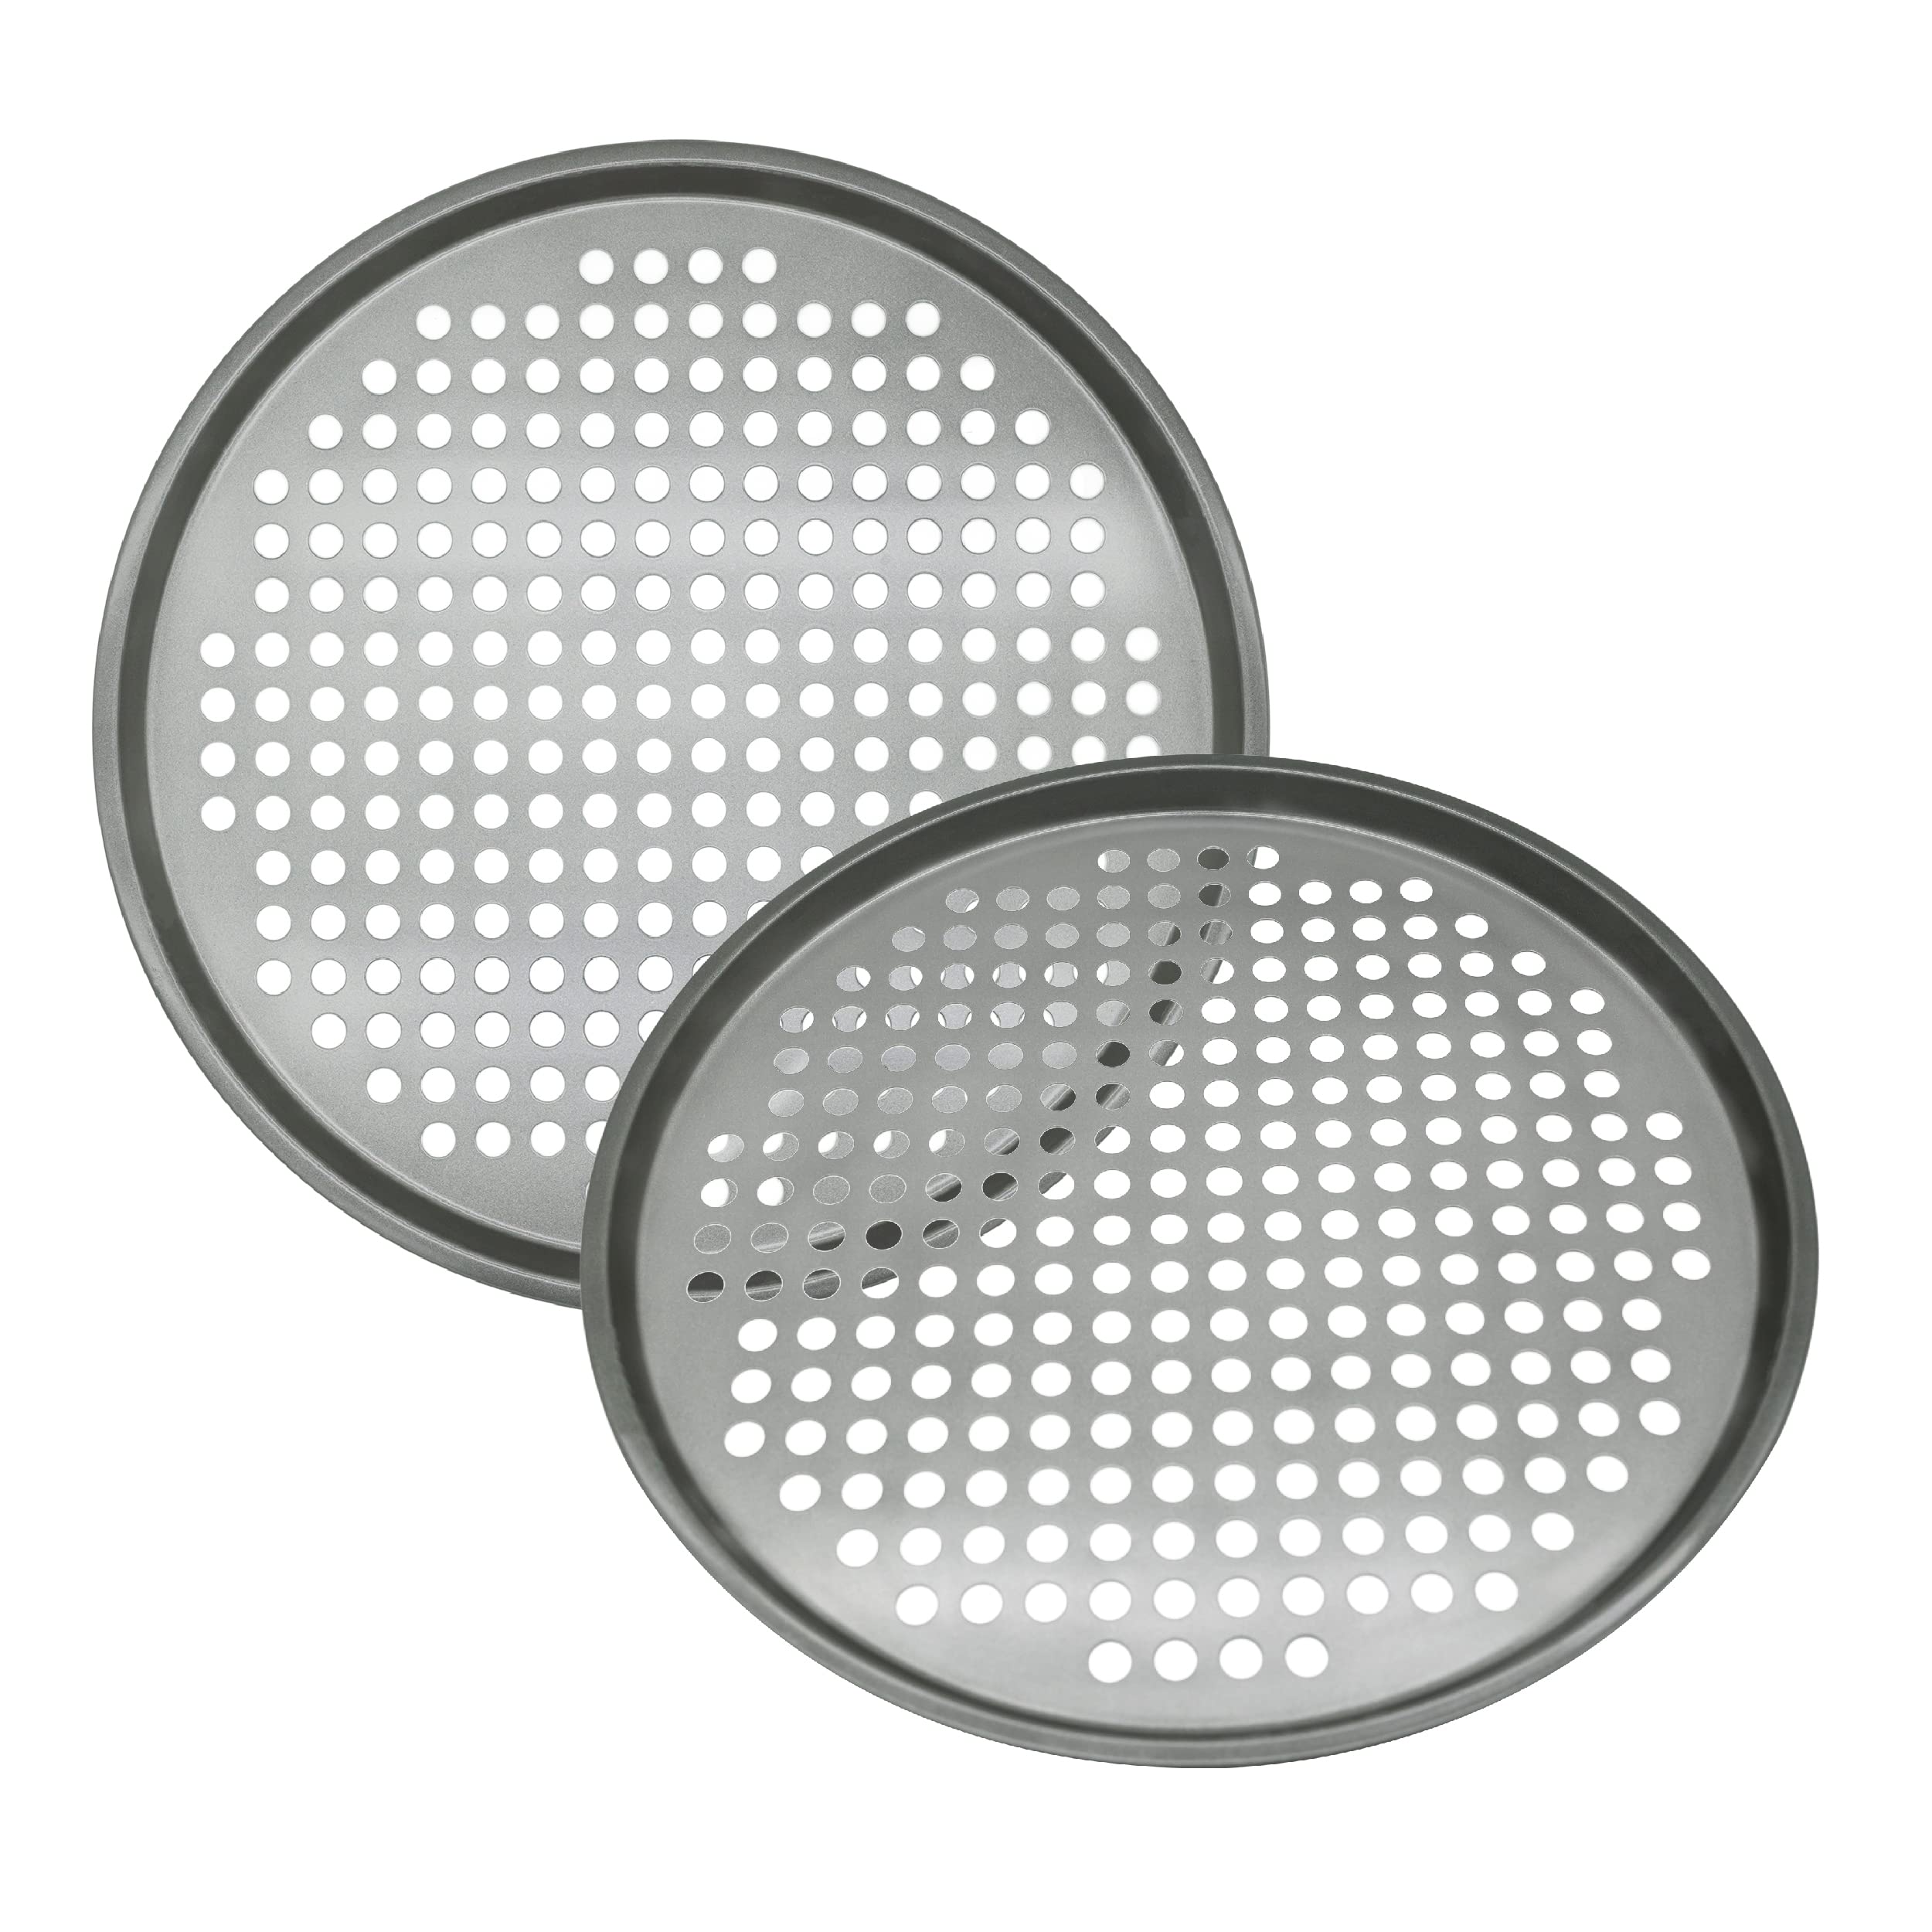 Maxi Small Pizza Pan w/Holes, Non-Stick, Scratch Resistant, Pizza Pan Set of 2, Made with Steel & Aluminum for Crispy Crust, Round Pizza Pan for Oven,13 Inch Baking Steel Pizza Pan Tray